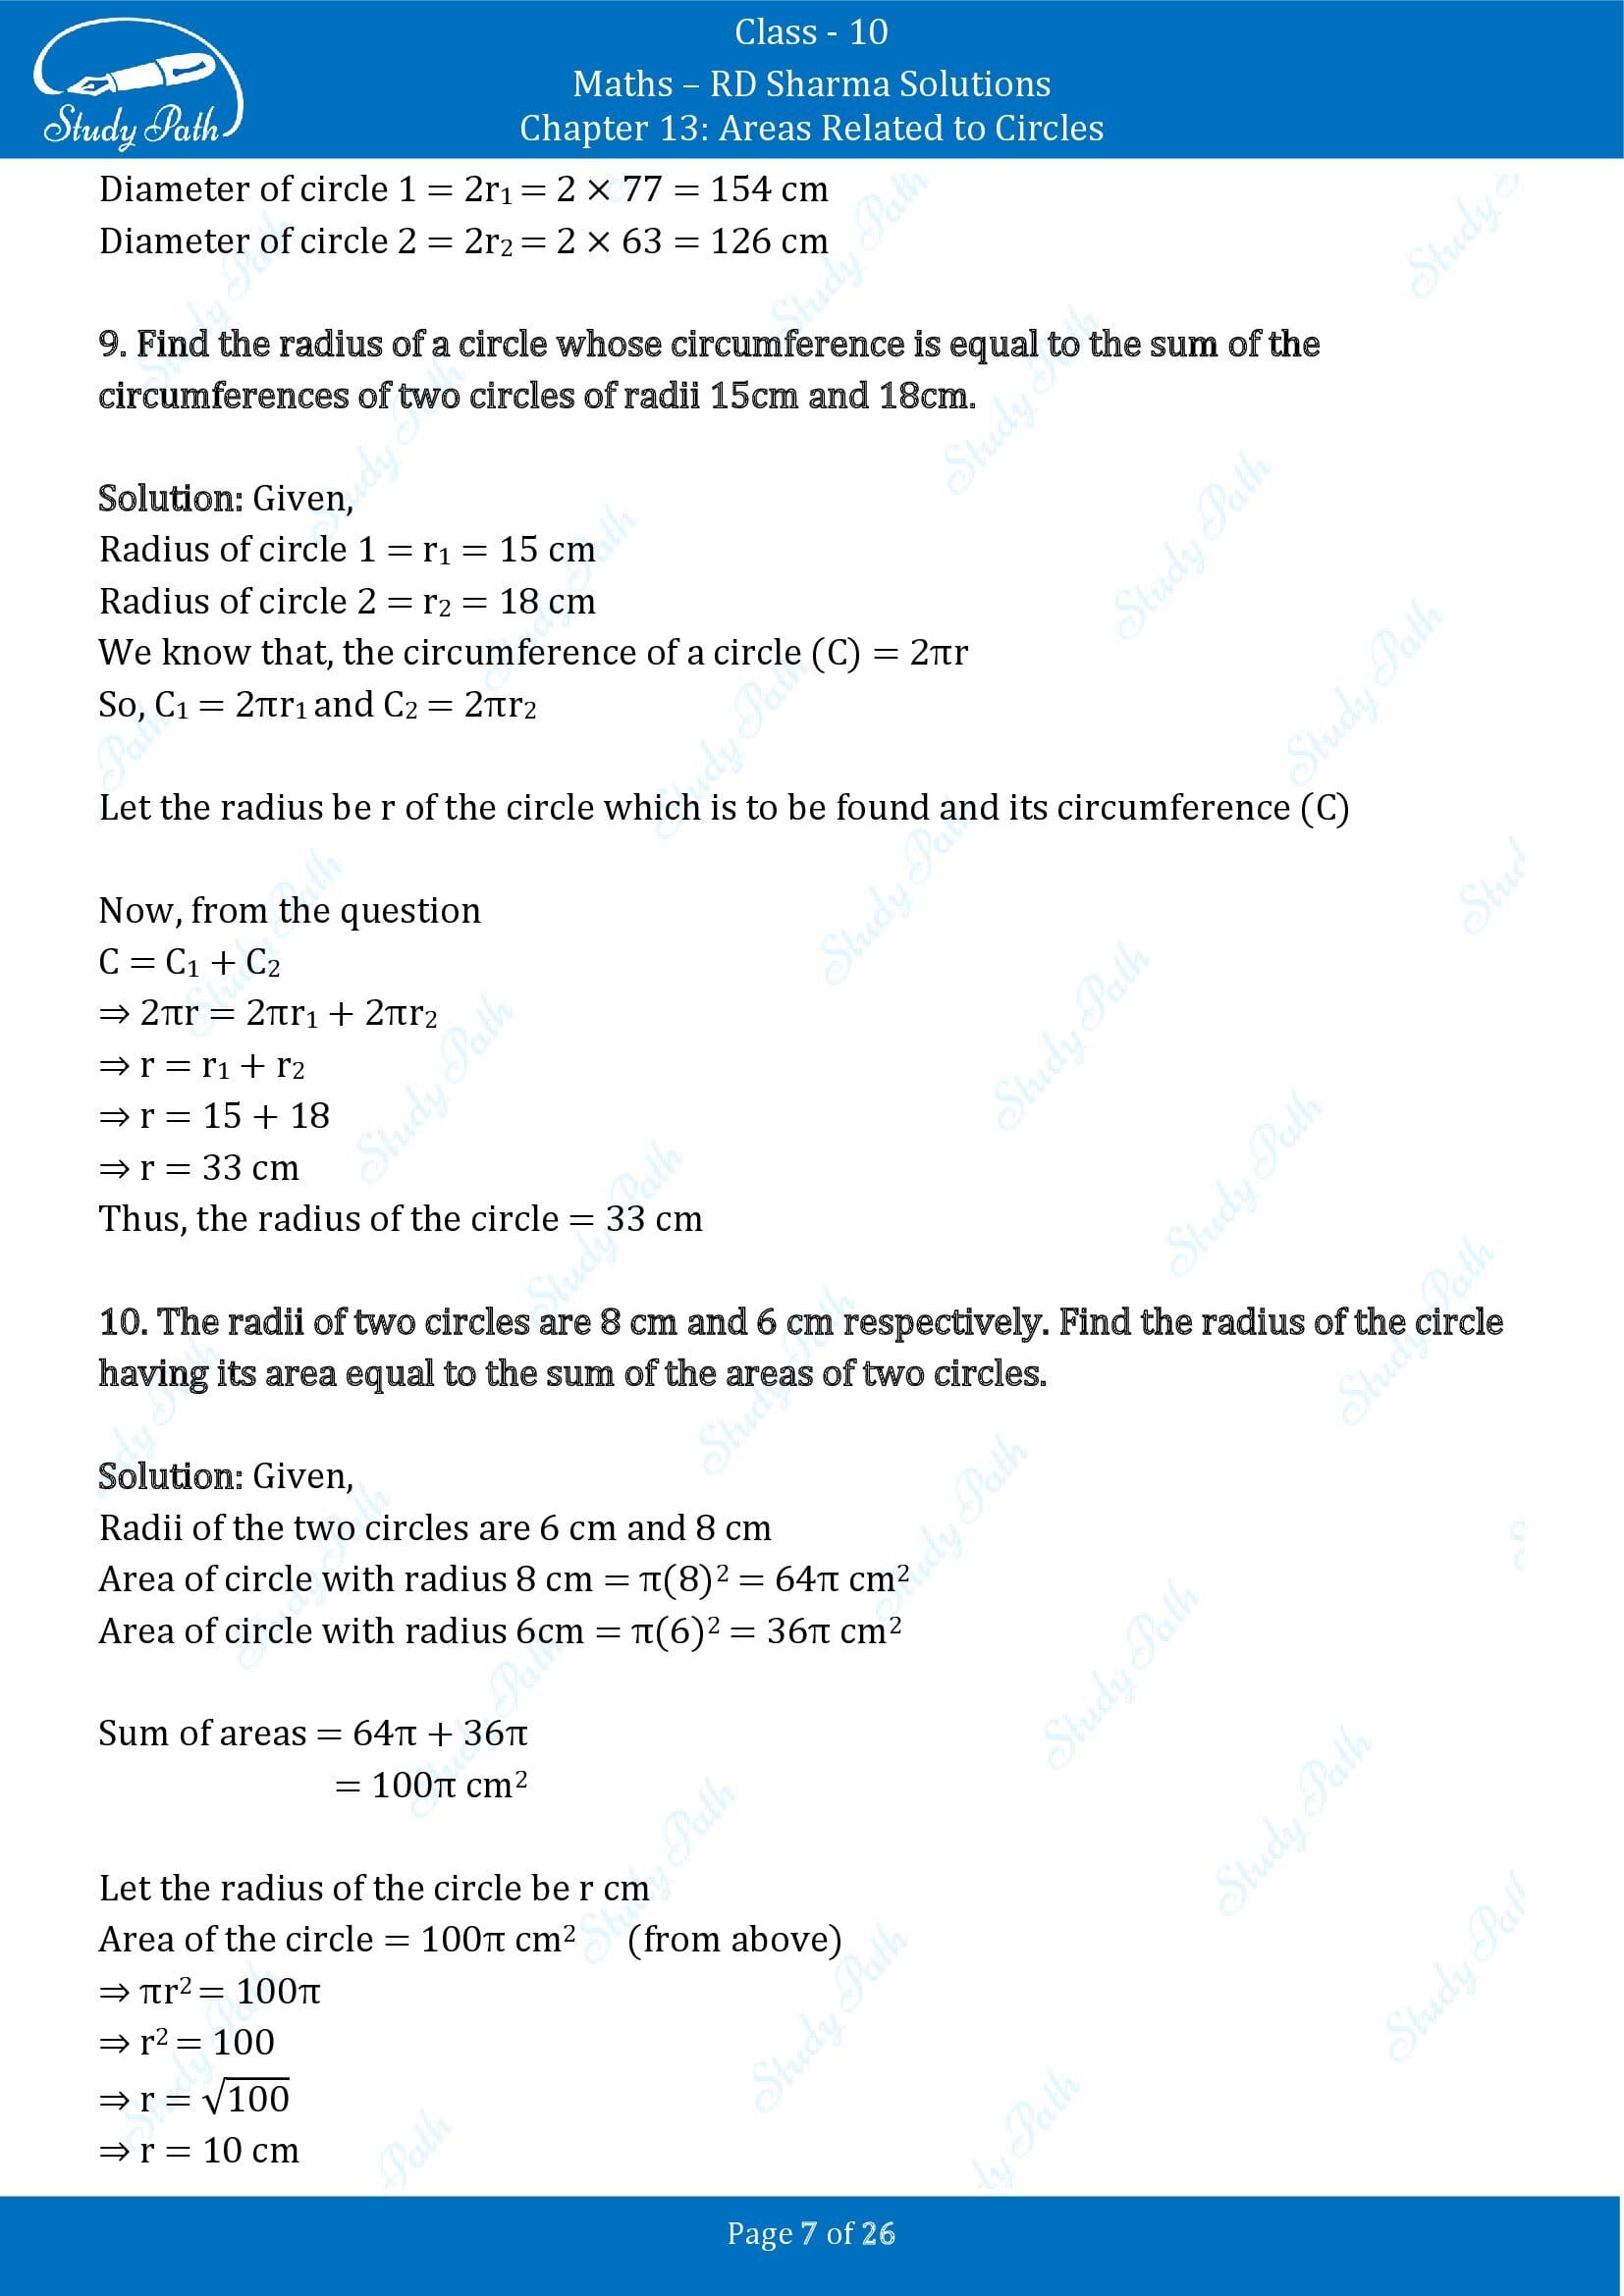 RD Sharma Solutions Class 10 Chapter 13 Areas Related to Circles Exercise 13.1 00007